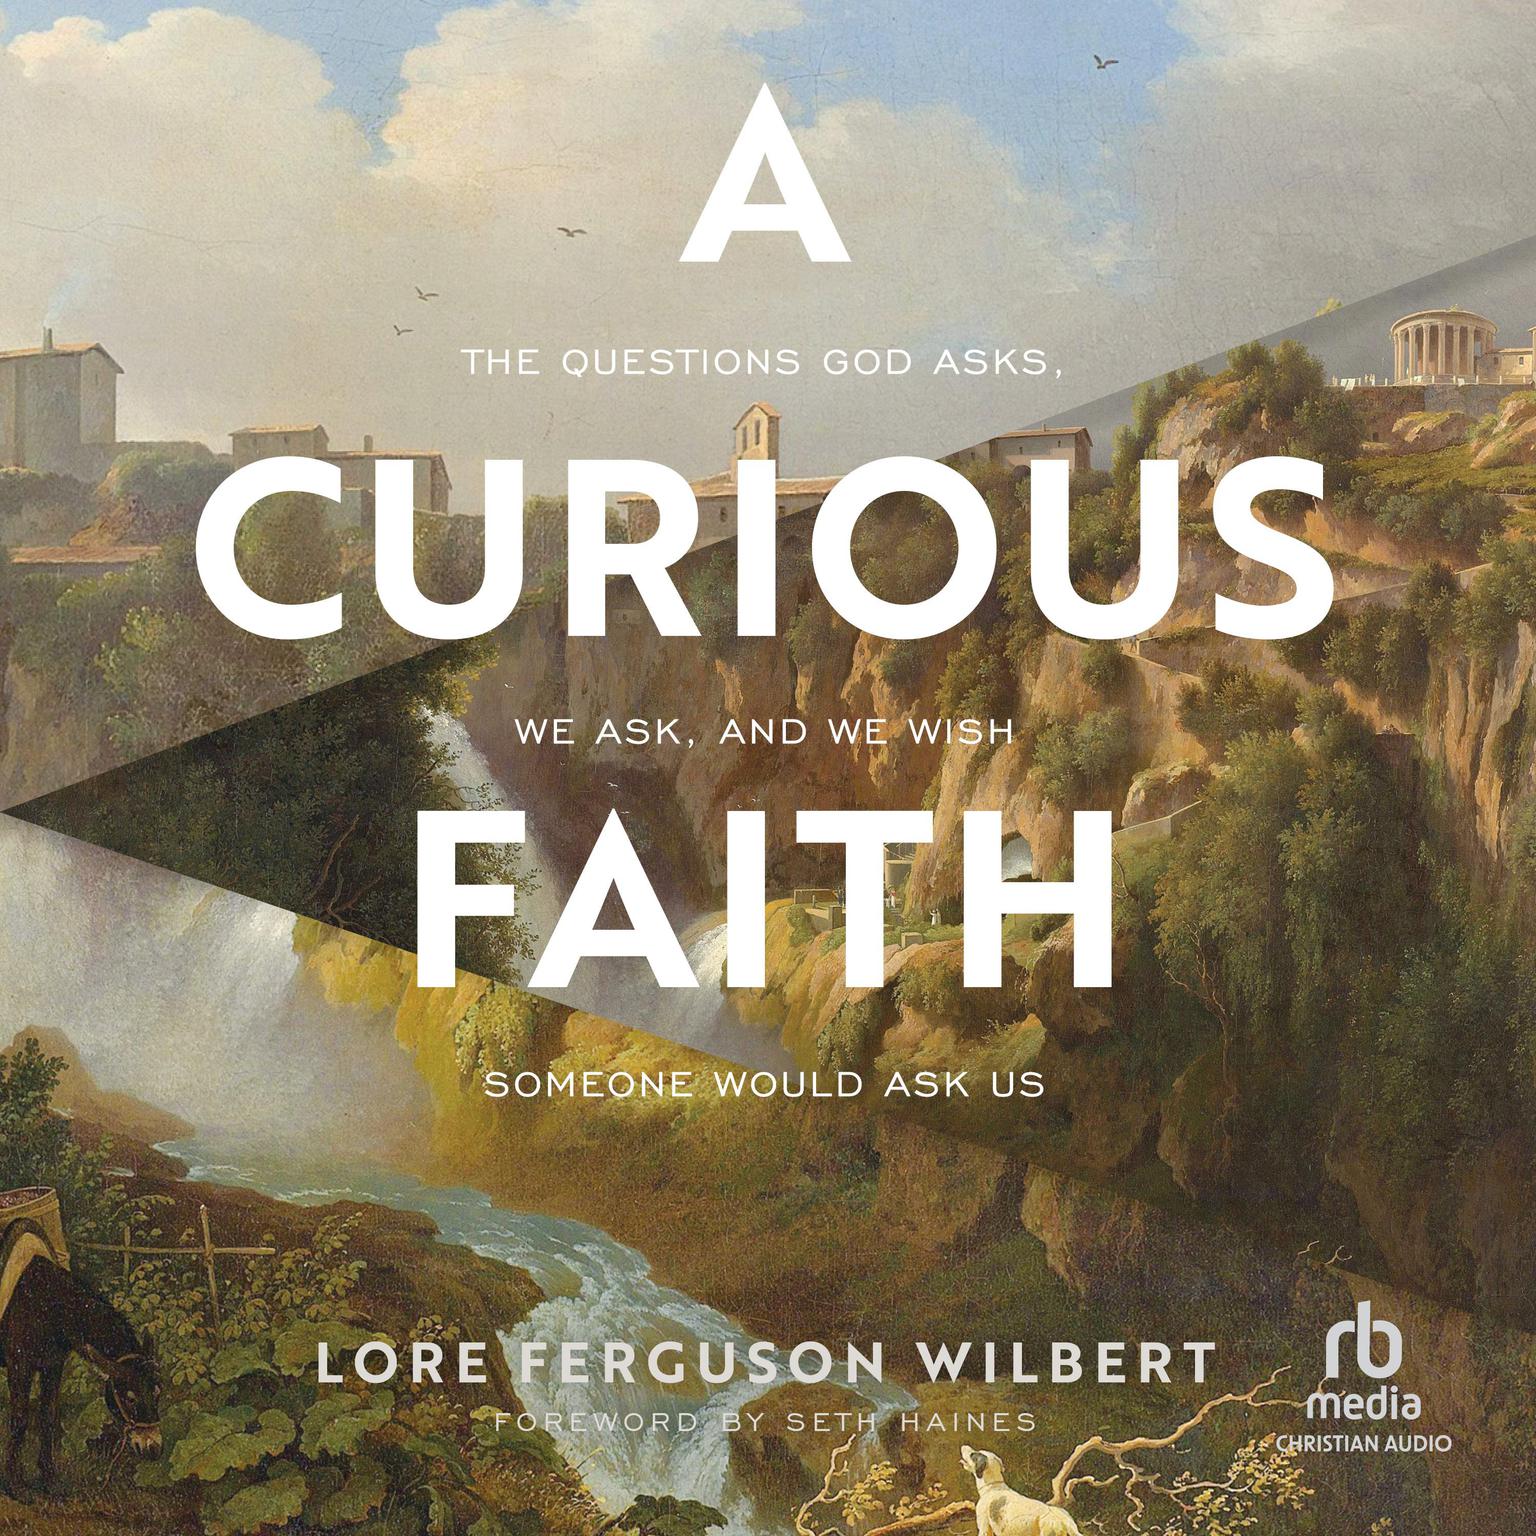 A Curious Faith: The Questions God Asks, We Ask, and We Wish Someone Would Ask Us Audiobook, by Lore Ferguson Wilbert